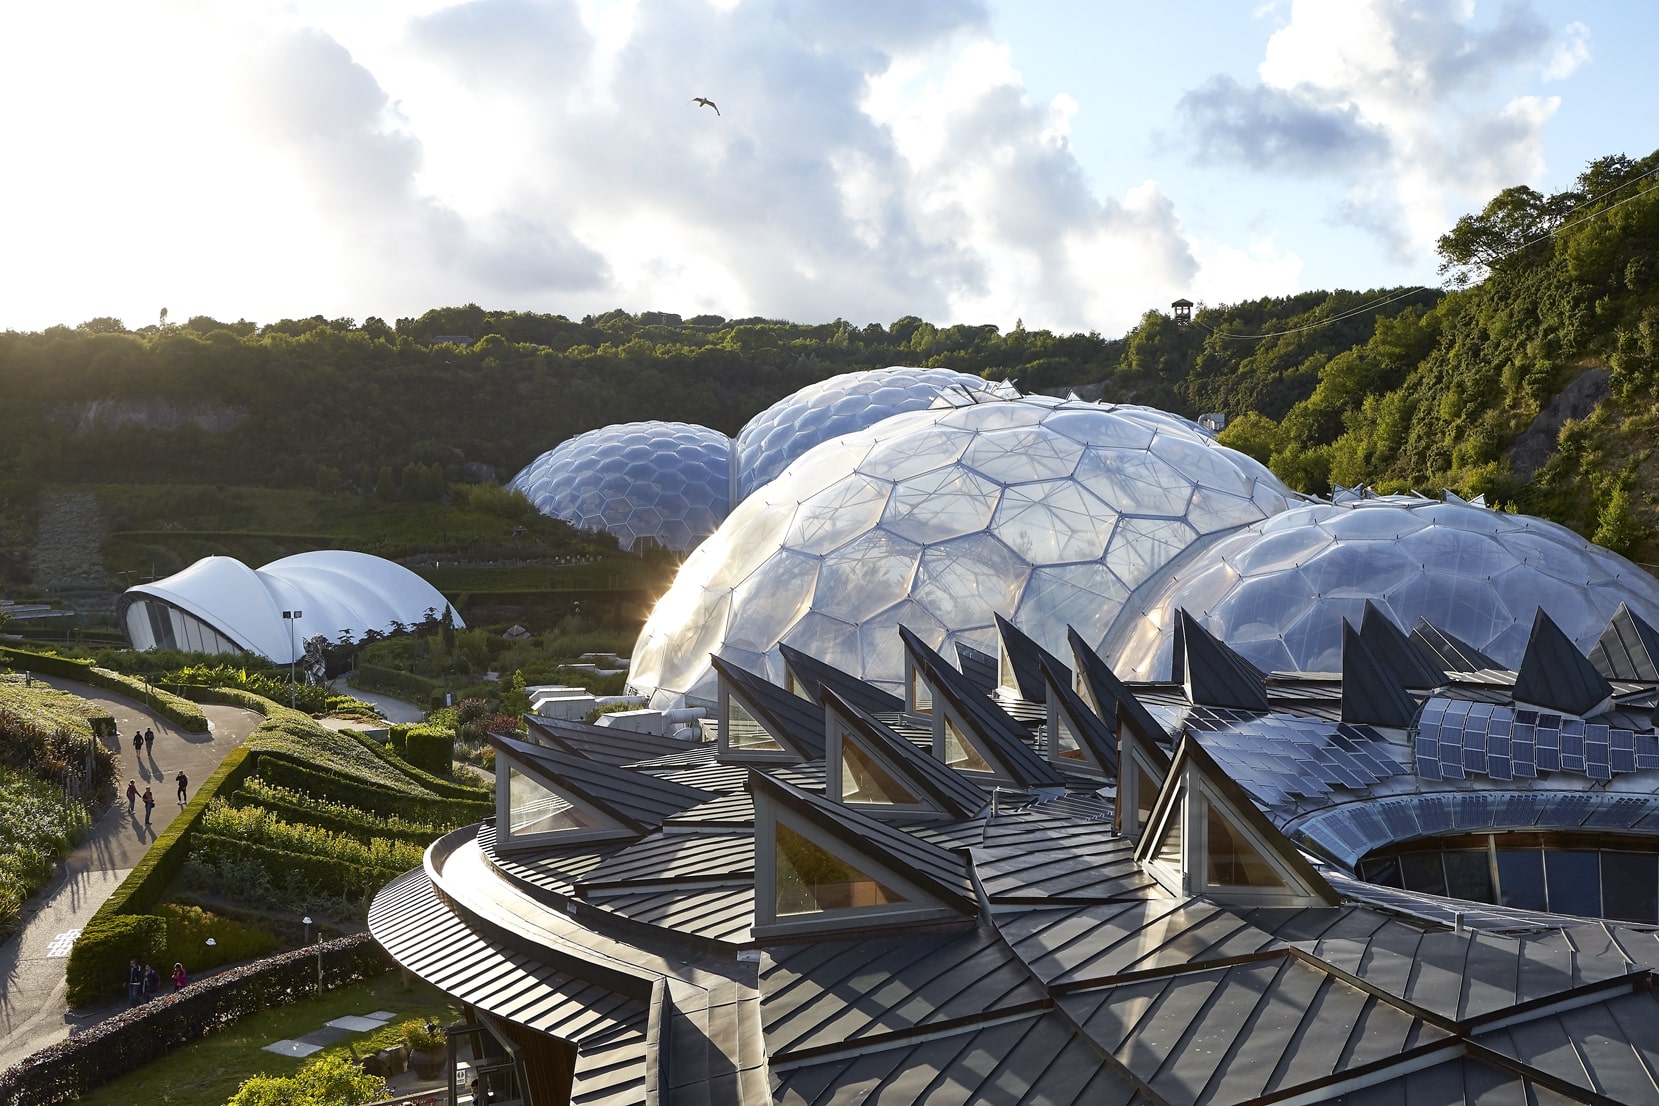 The Eden Project, located in Cornwall UK, is a one-of-a-kind project that set the tone for the next generation of sustainable botanical and zoo projects.